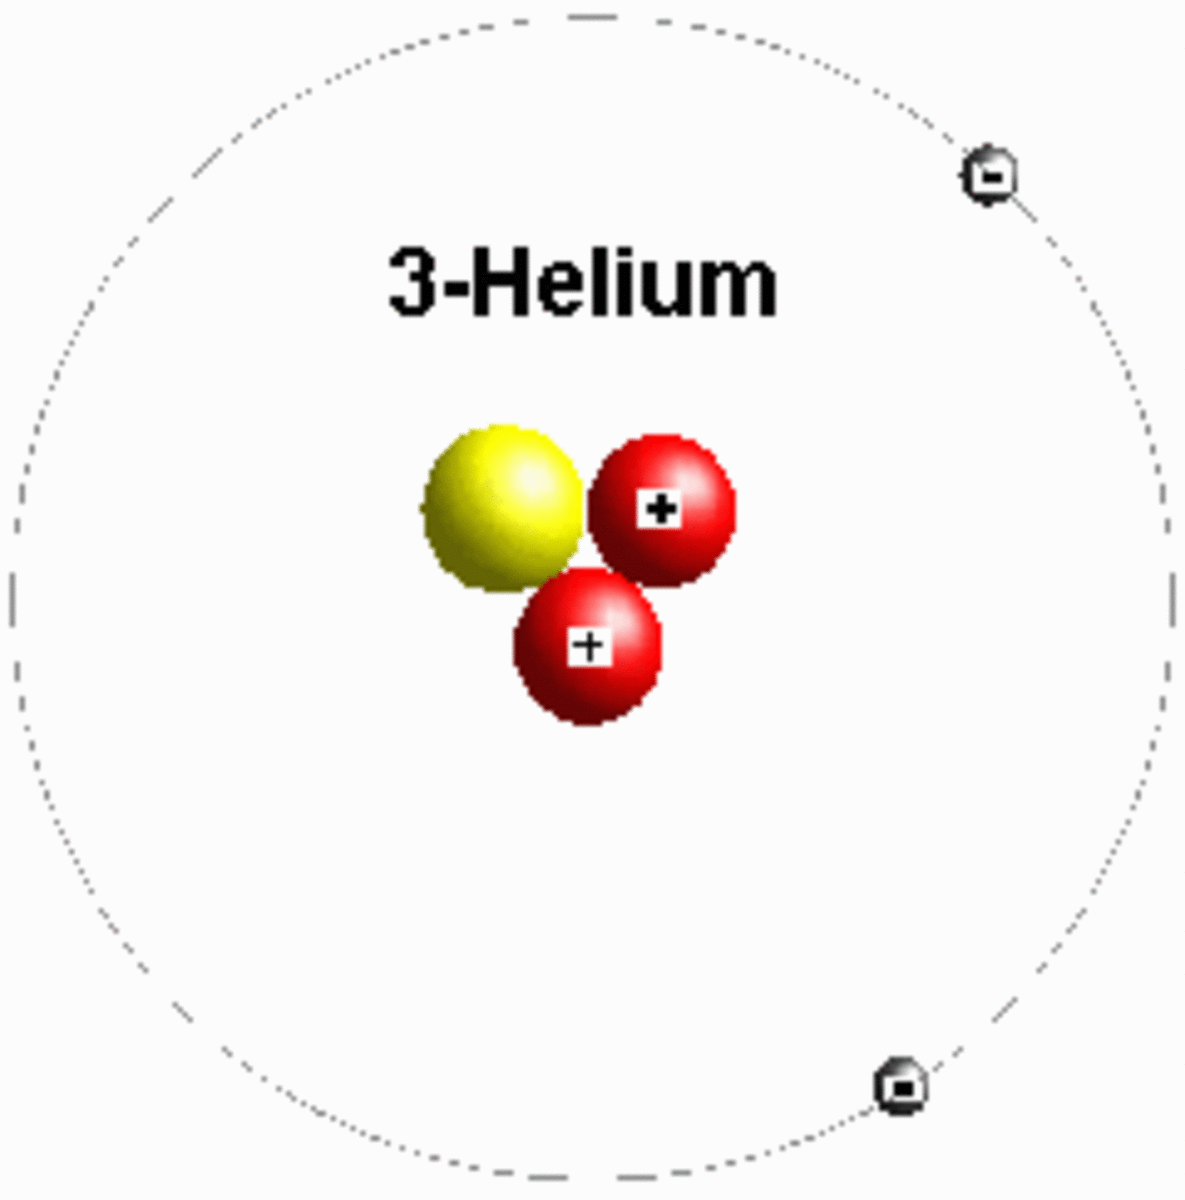 Helium 3 isotope has one neutron and two protons in its nucleus. The outer ring, or valence,  contains two electrons